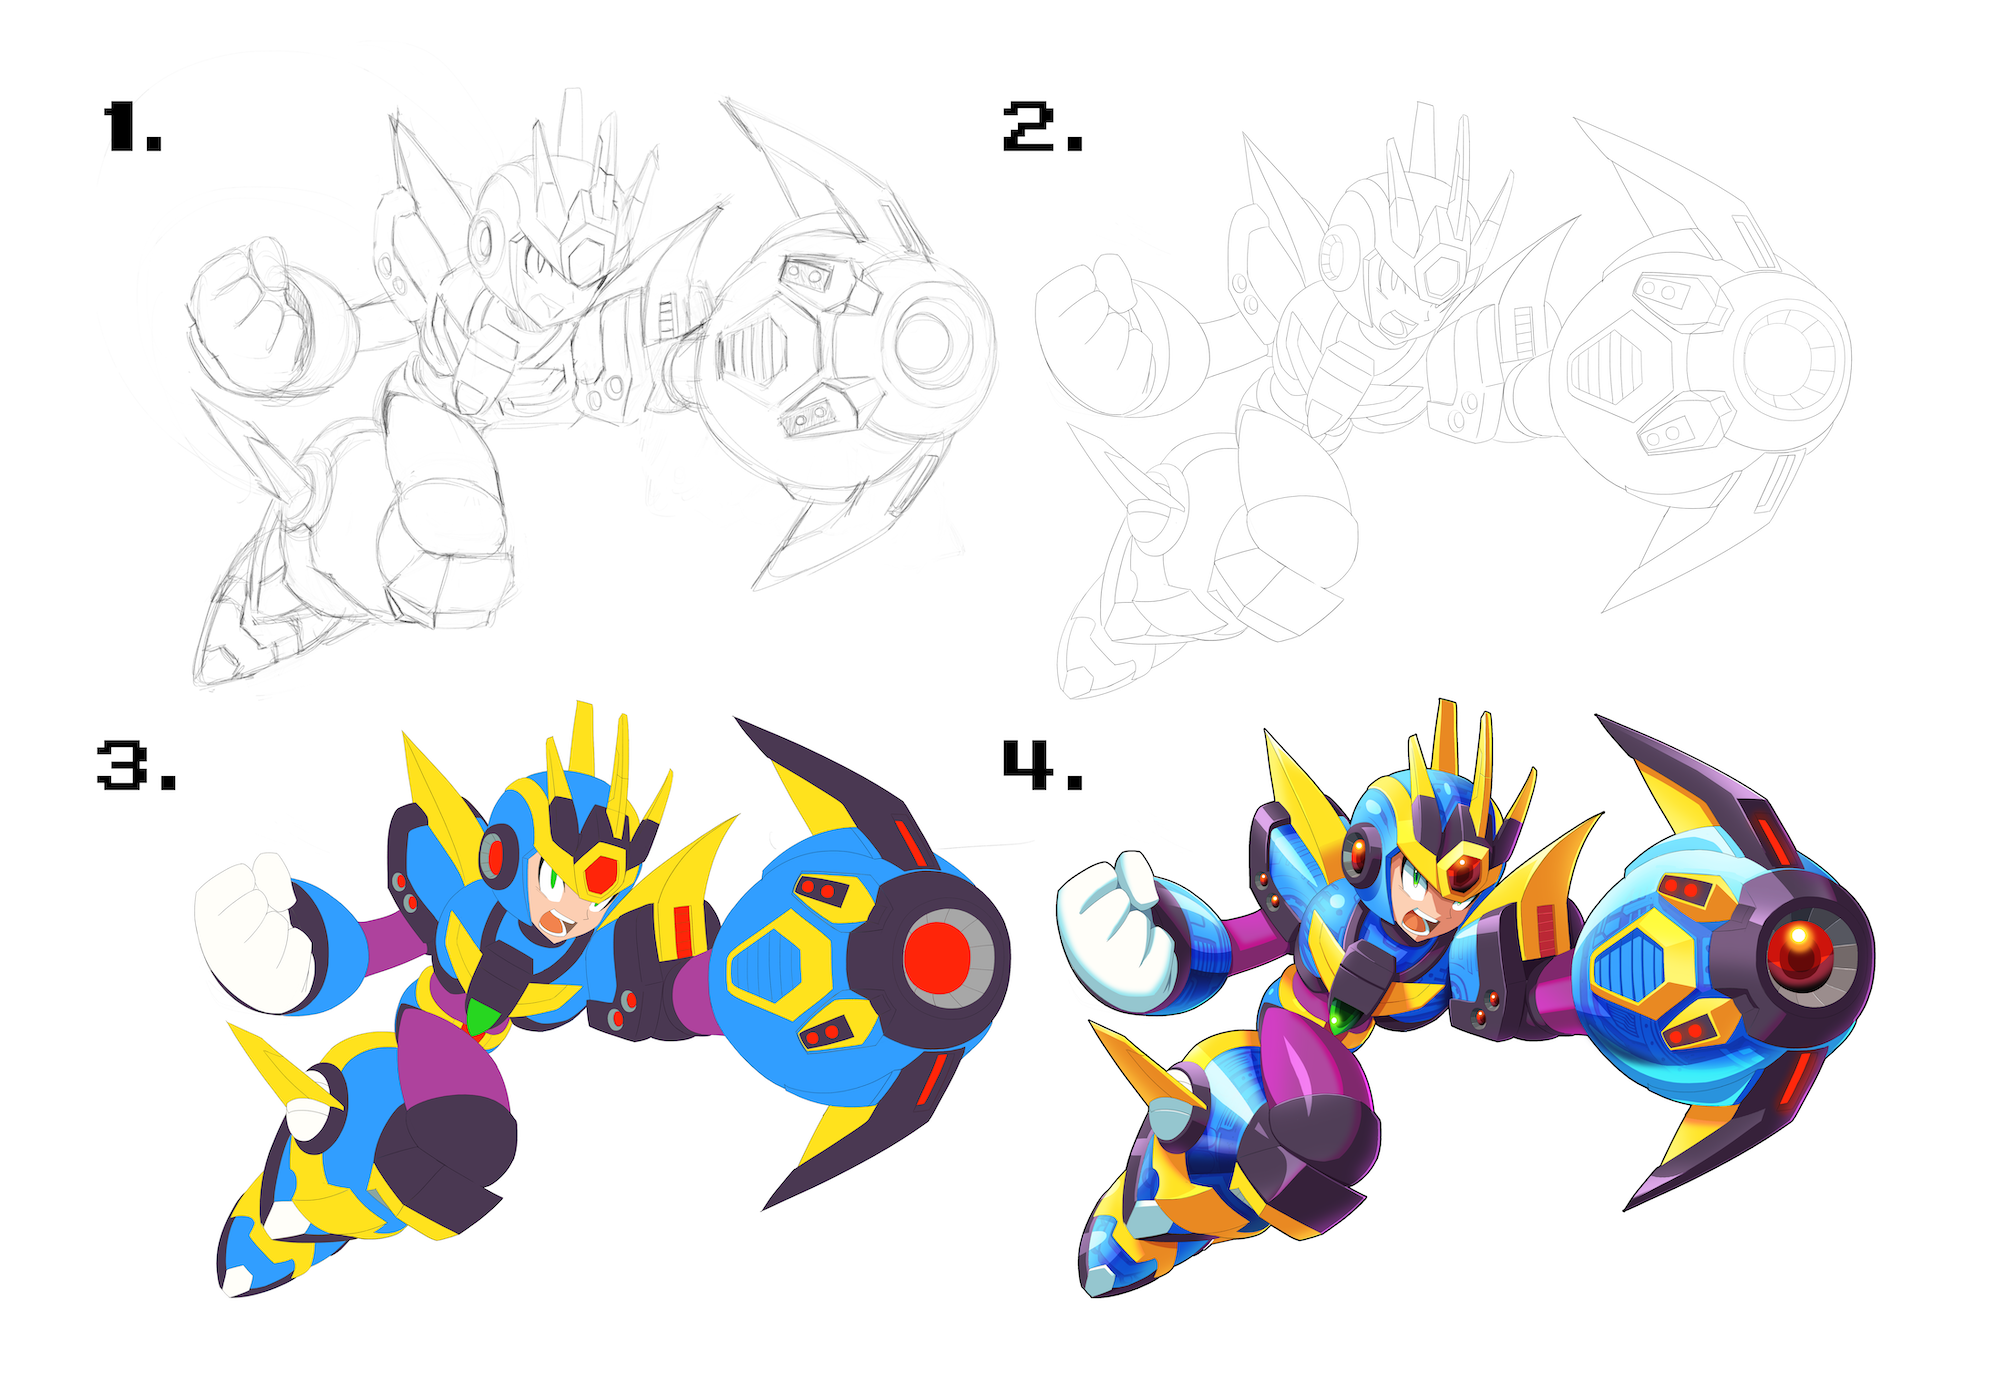 Art by ultimatemaverickx for the Mega Man X 1-8: The Collection vinyl box set available from Lacedrecords.com